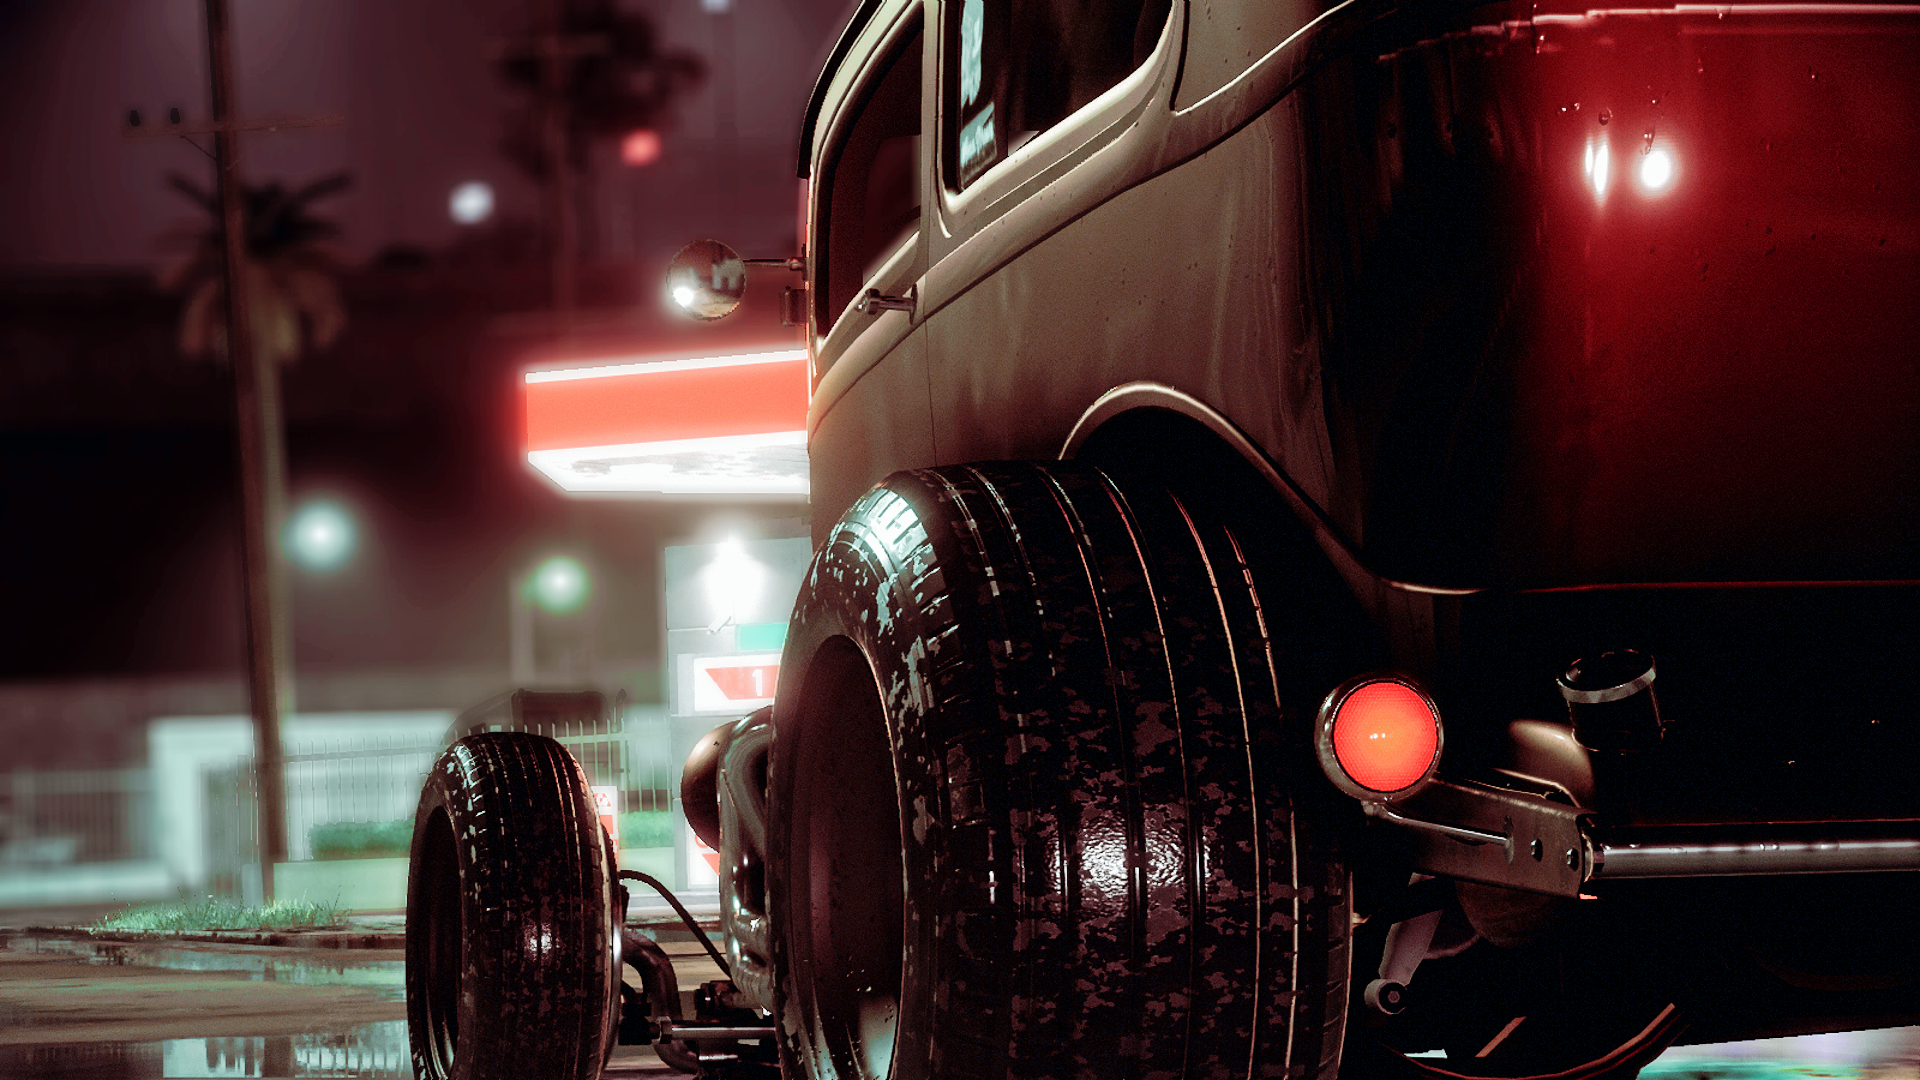 General 1920x1080 Need for Speed Ford Hot Rod Rat Rod car custom CGI video games vehicle